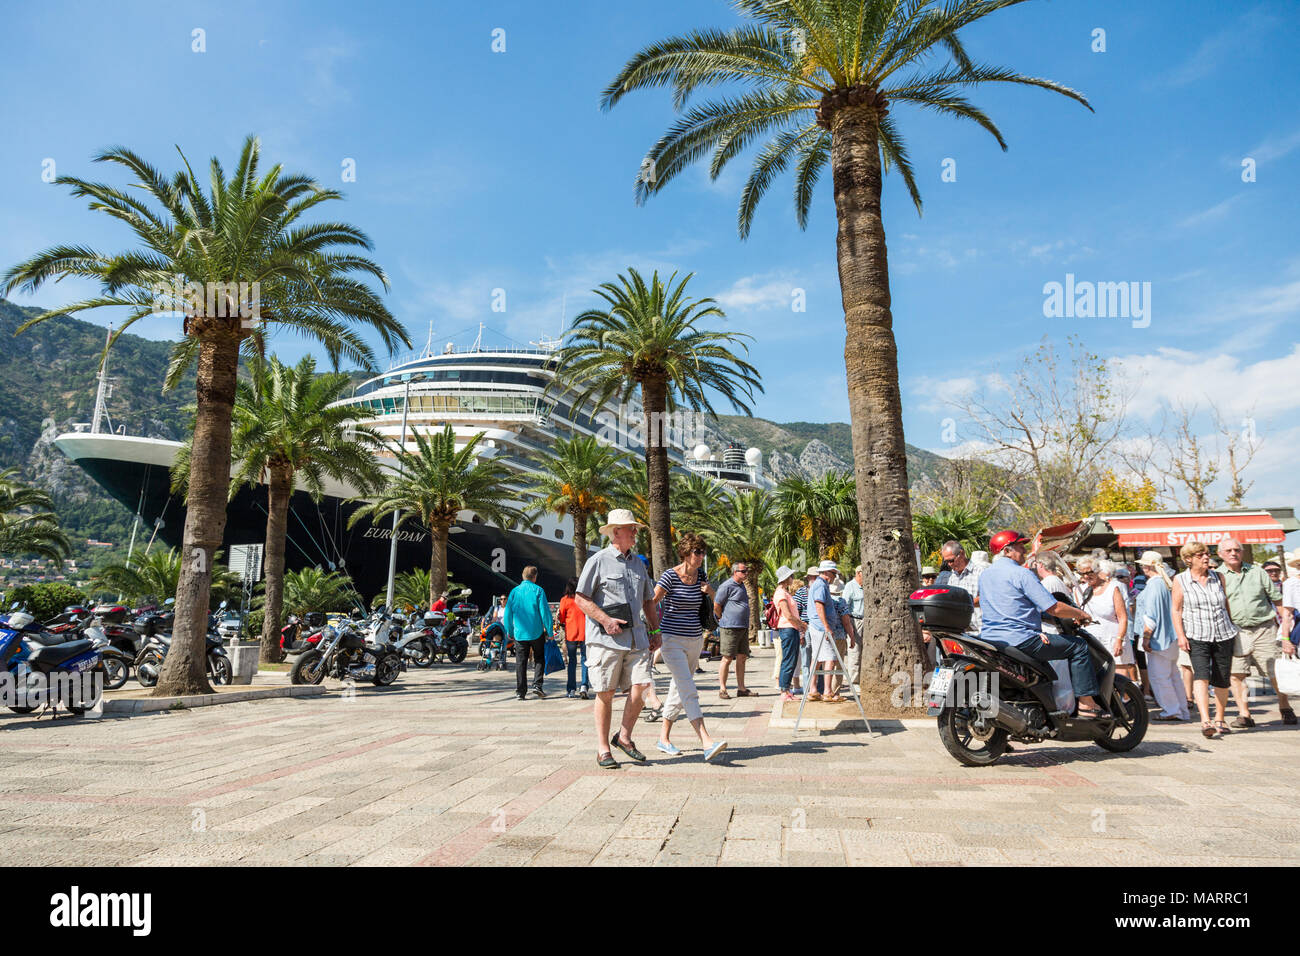 KOTOR, MONTENEGRO - september 25, 2016: People from large cruise ships in a Bay of Kotor go to the old town of Kotor, Montenegro. Stock Photo